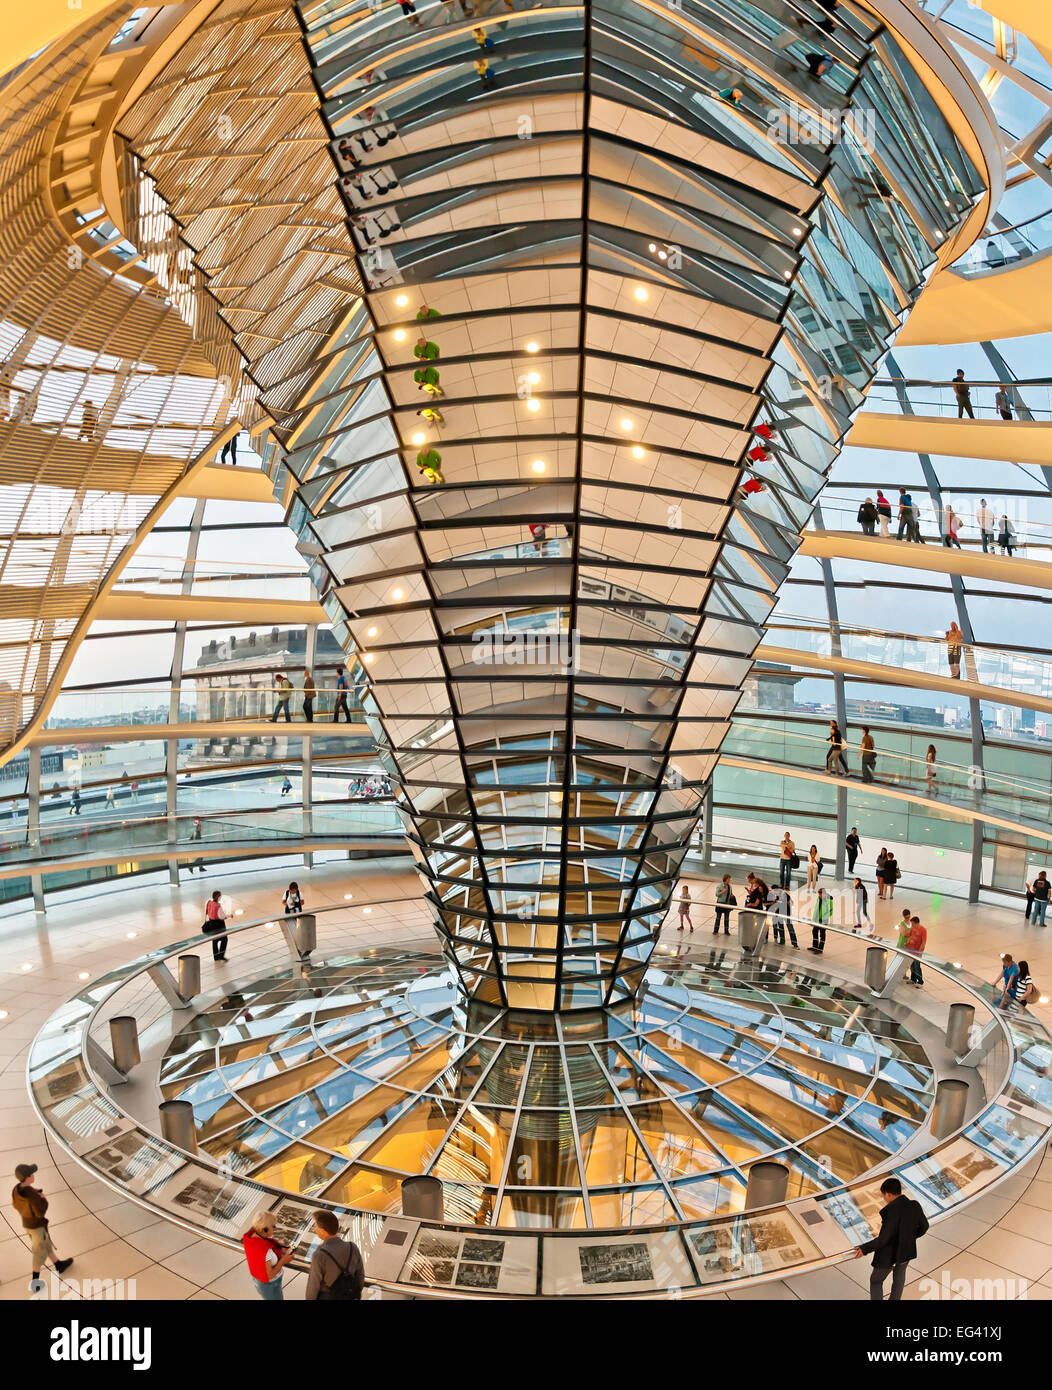 BERLIN, GERMANY - JUNE 08, 2013: people visit the Reichstag dome in Berlin, Germany. It is a glass dome constructed on top of re Stock Photo